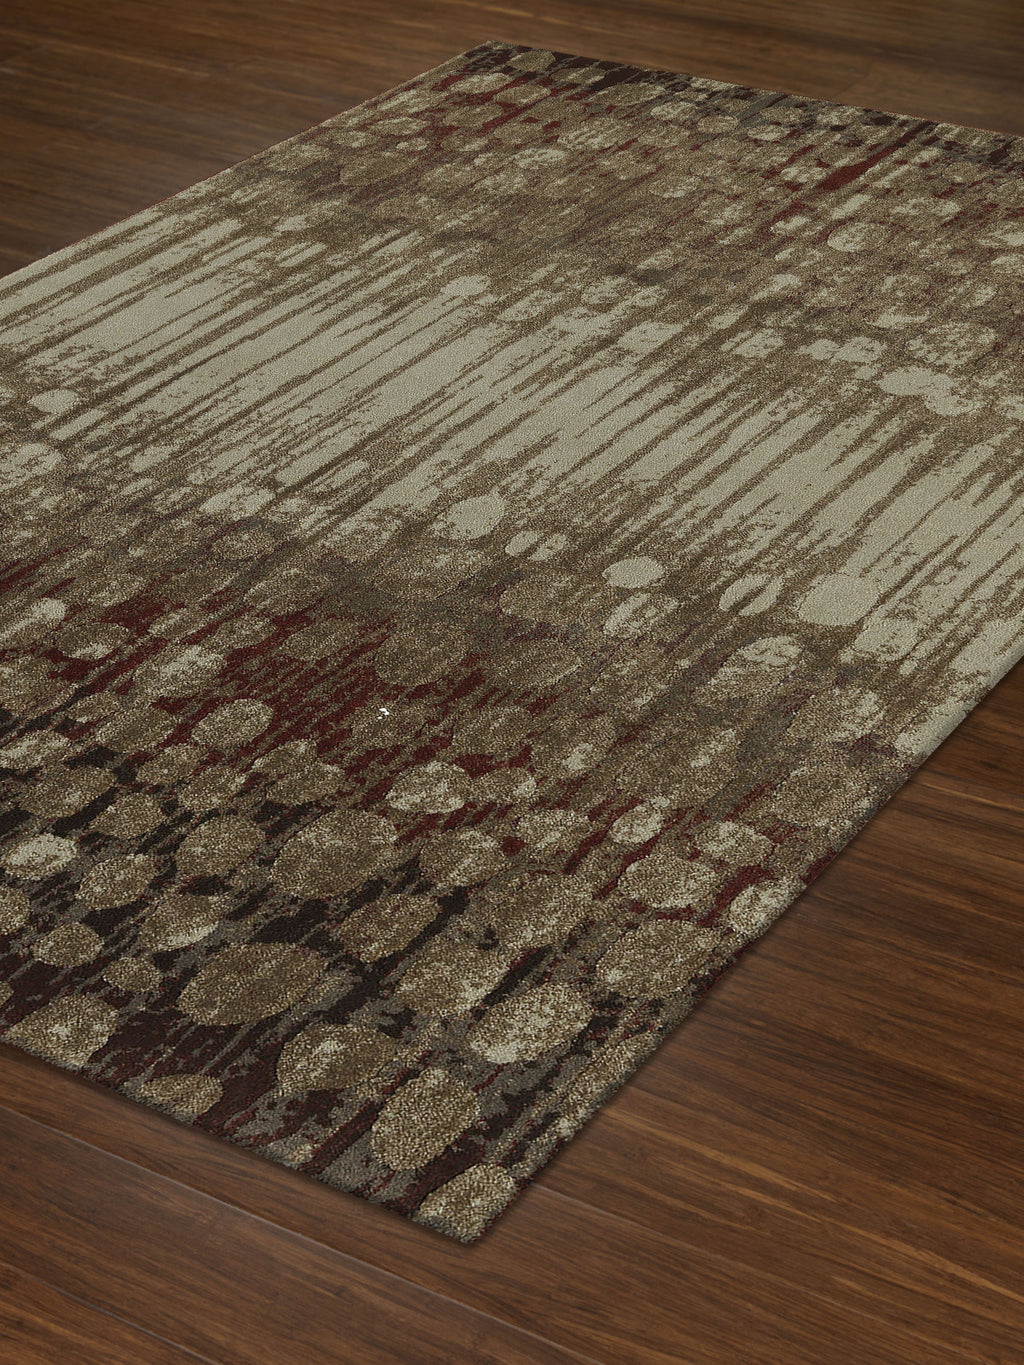 Dalyn Upton UP5 Spice Area Rug Floor Image Feature